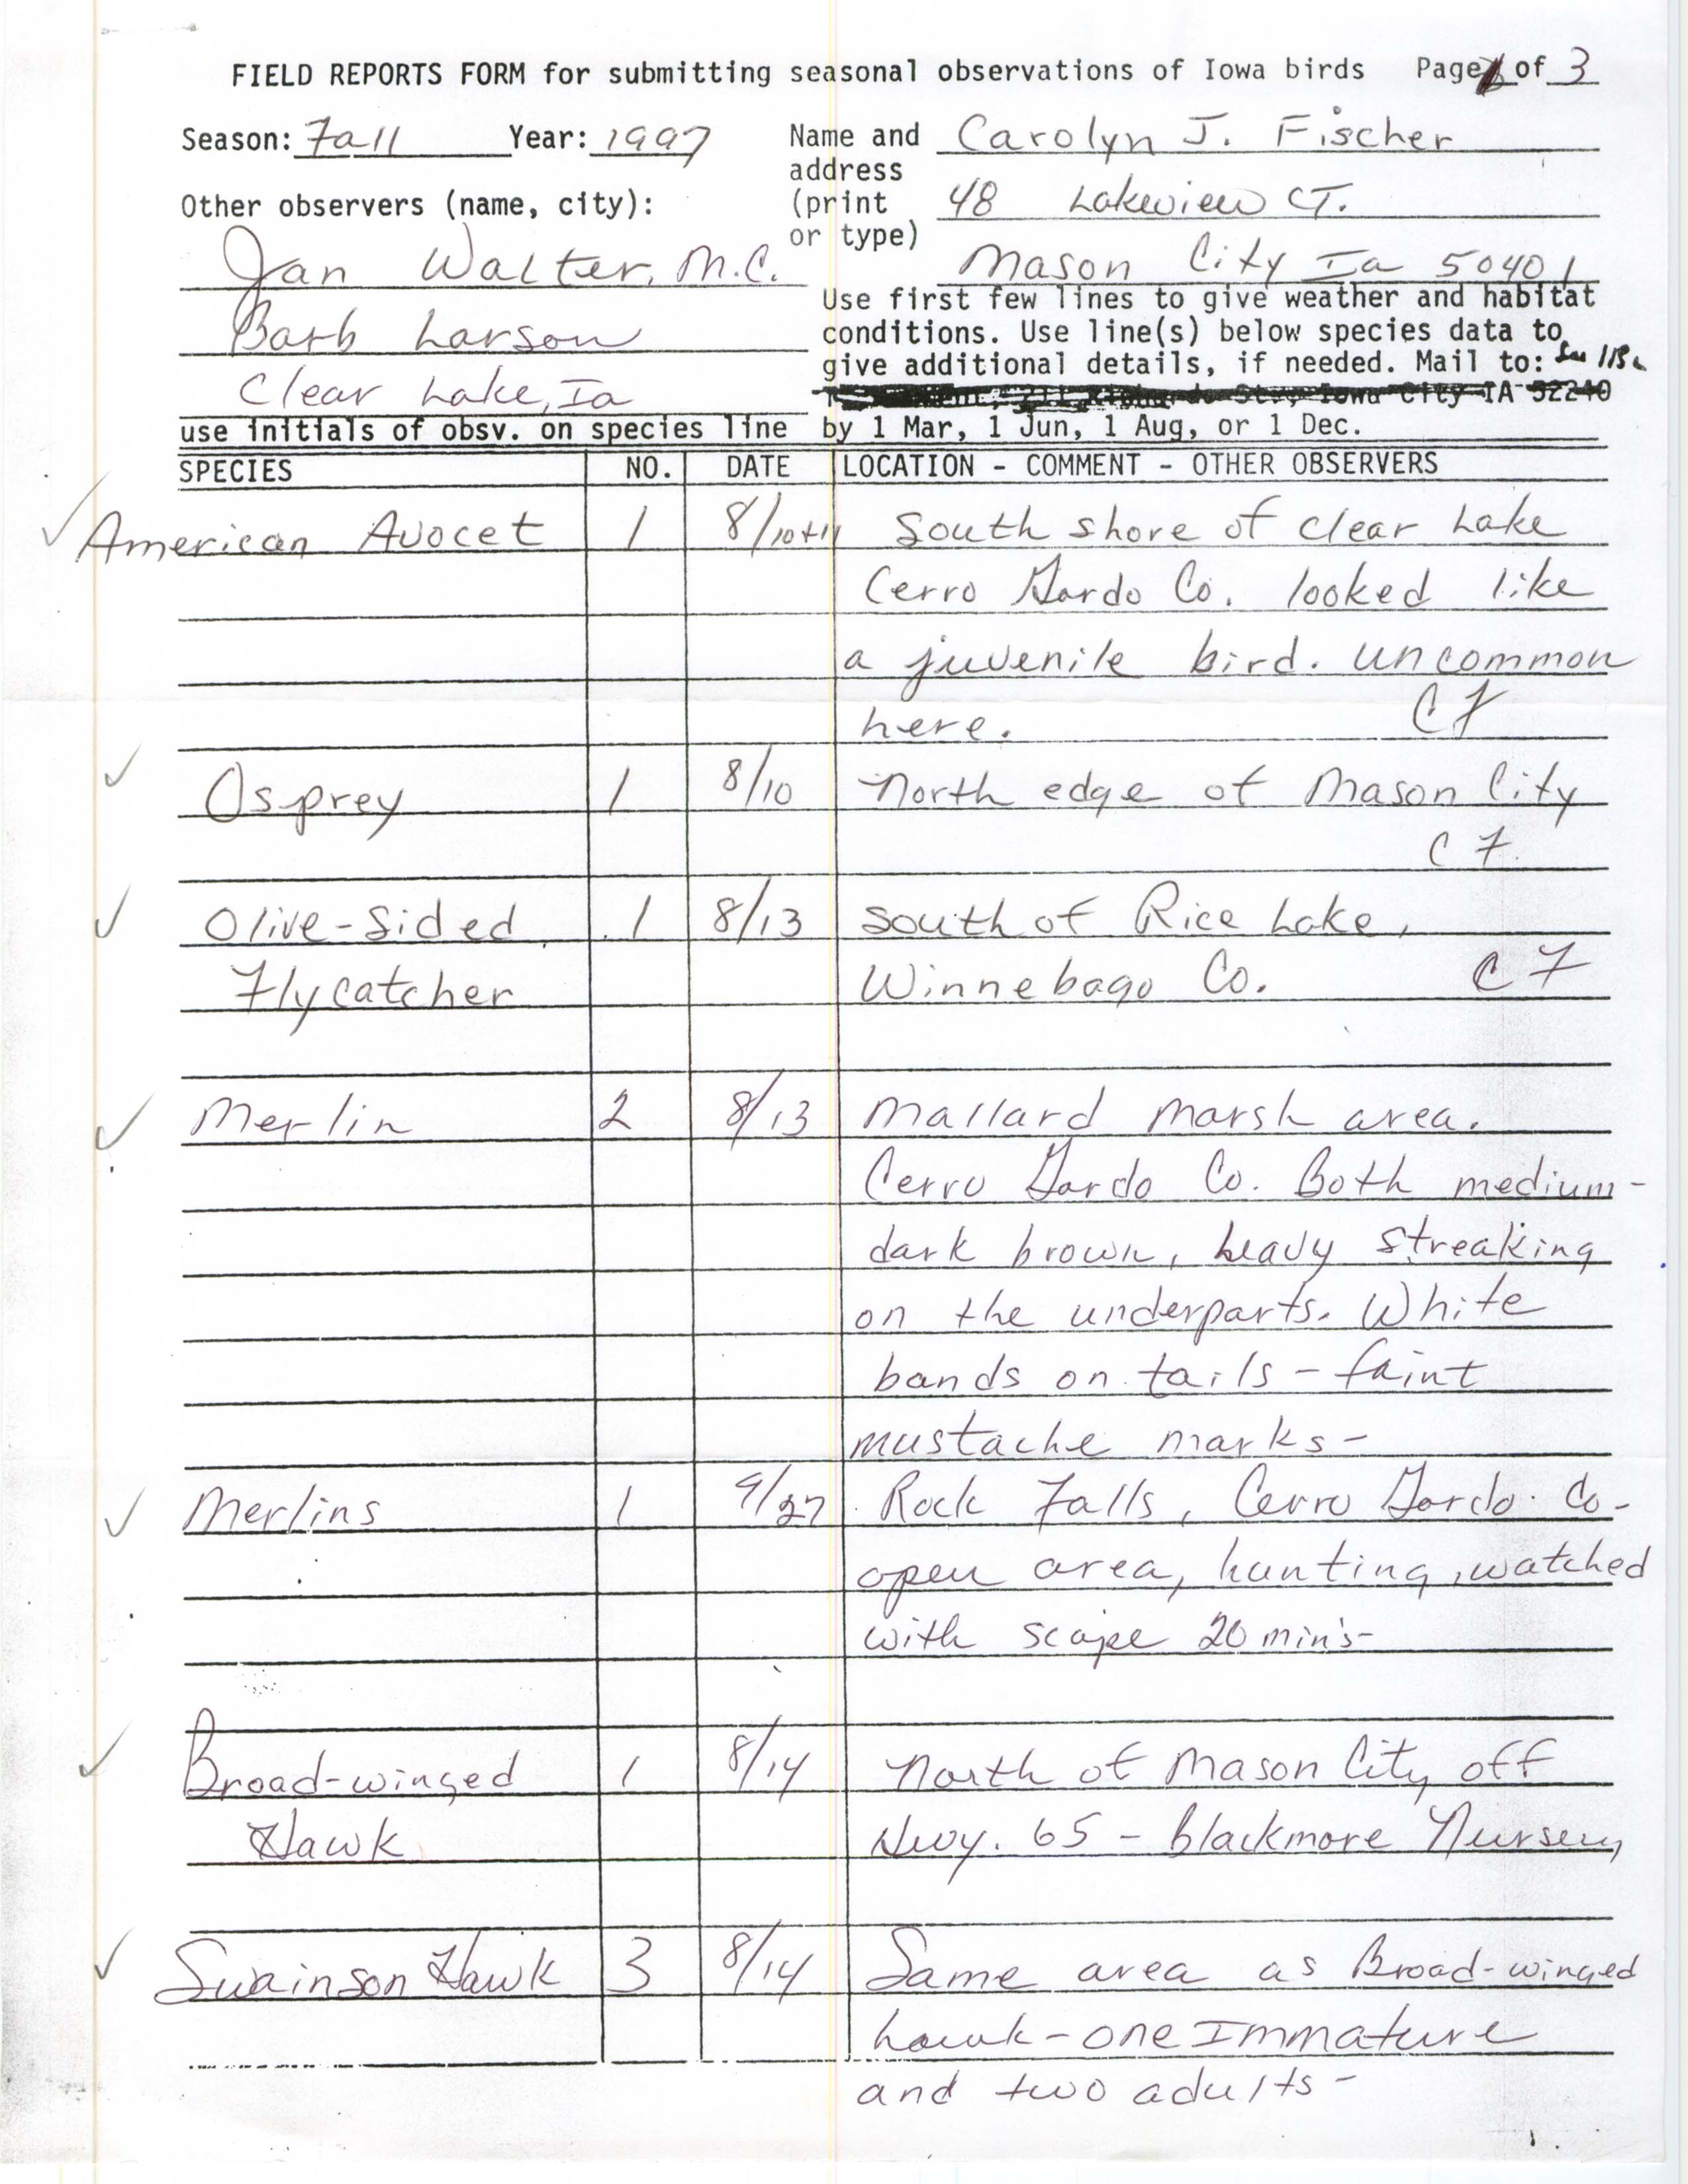 Field reports form for submitting seasonal observations of Iowa birds, Carolyn J. Fischer, fall 1997